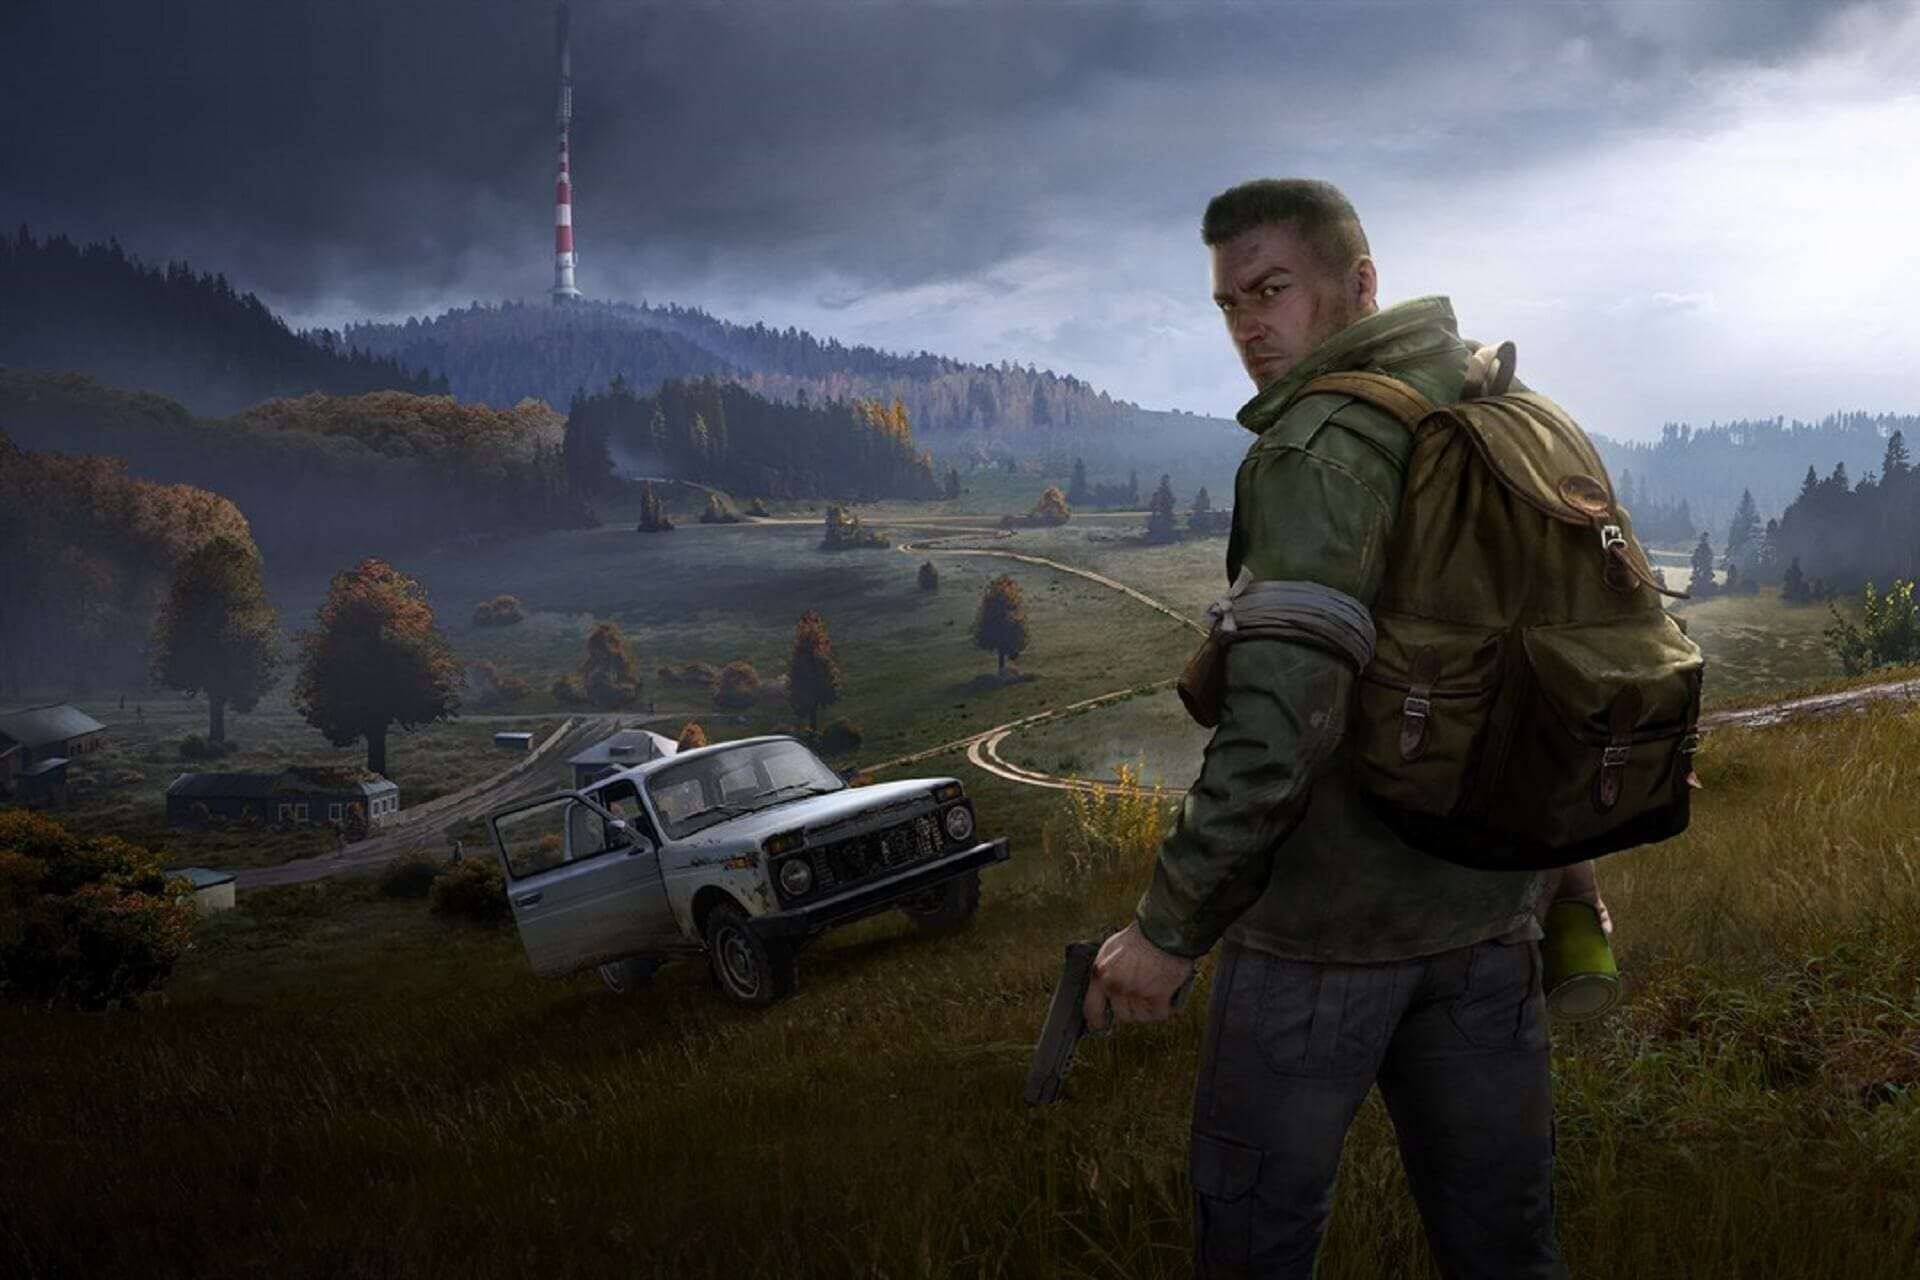 reduce ping and lag in DayZ with VPN